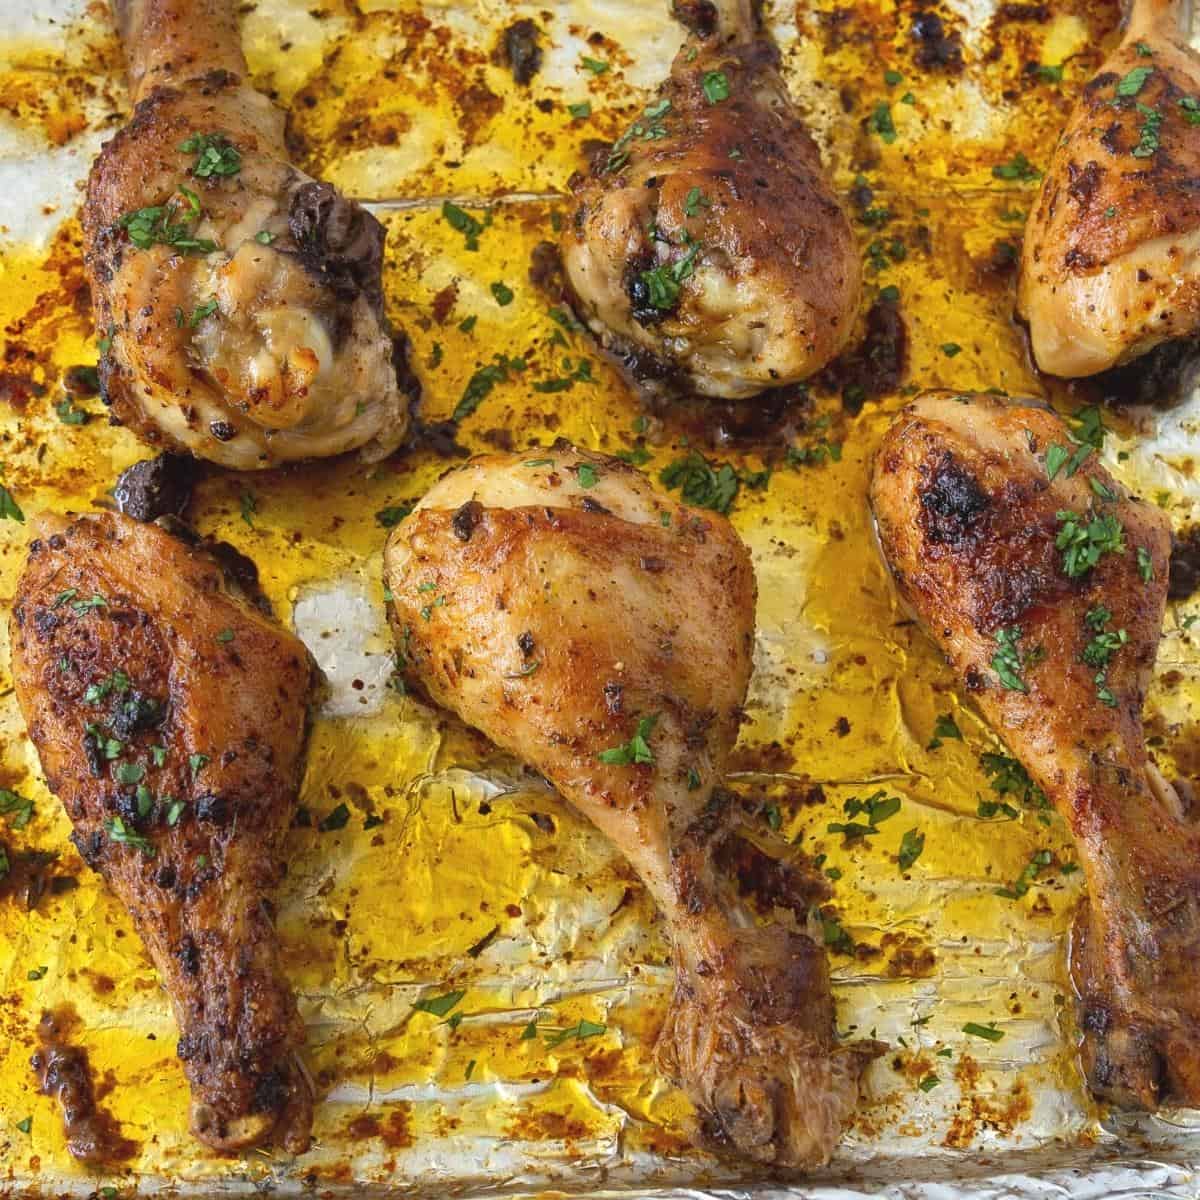 A baking sheet with baked chicken legs.